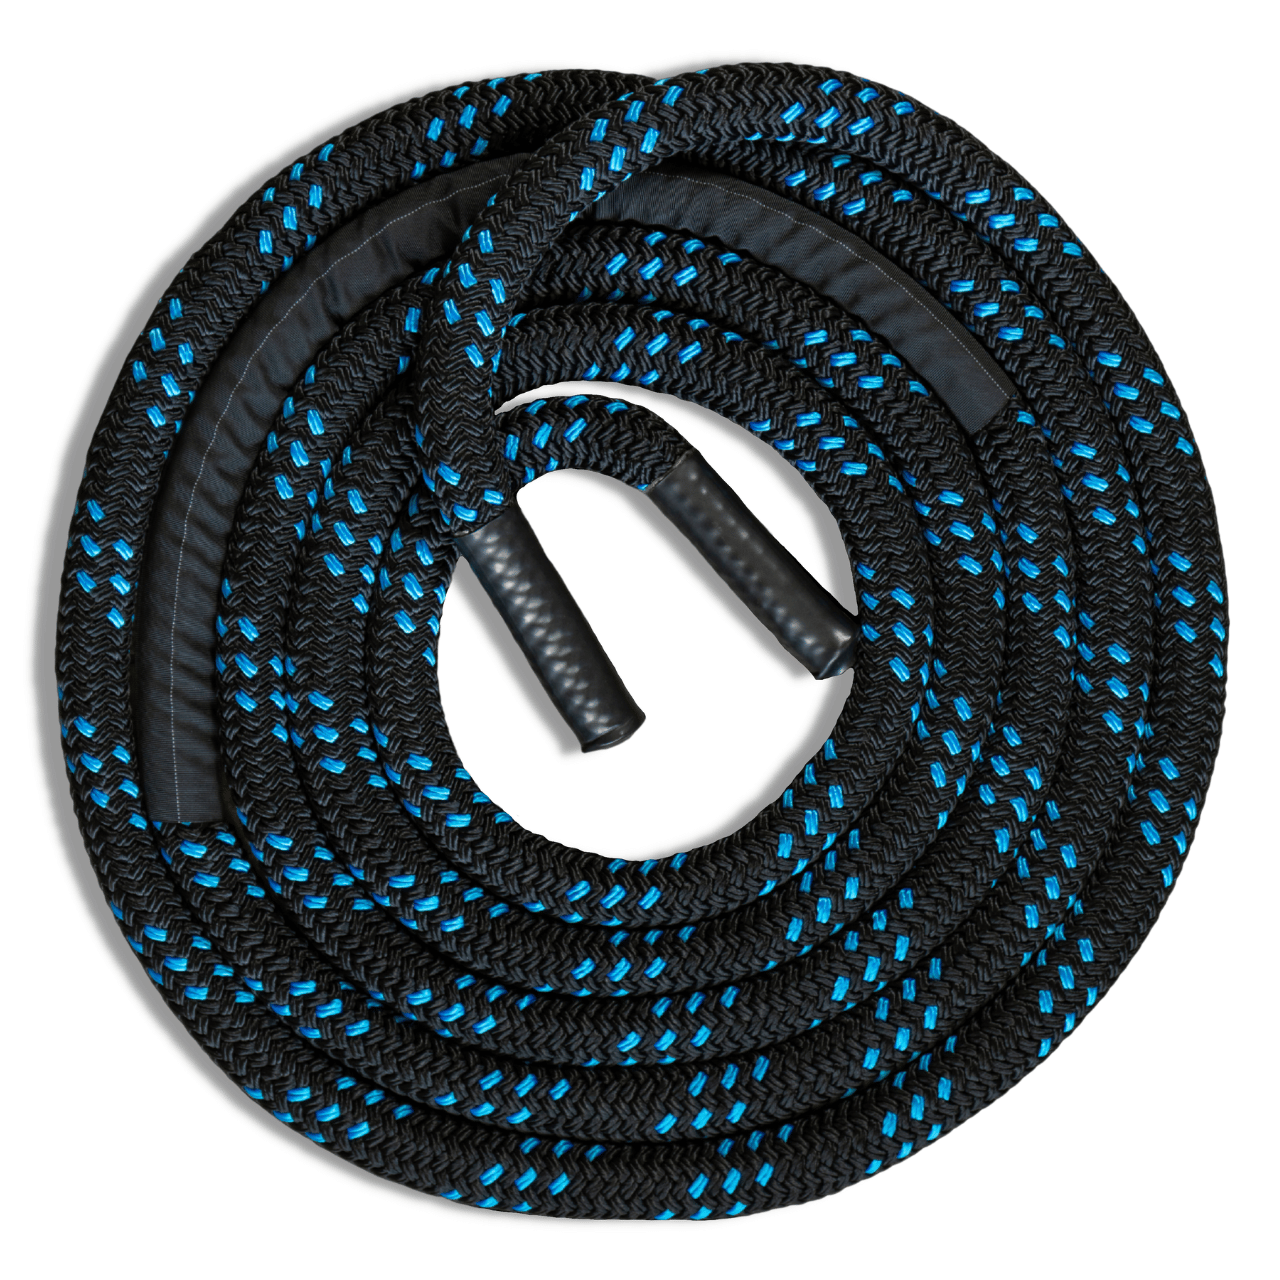 Twisted Battle Rope